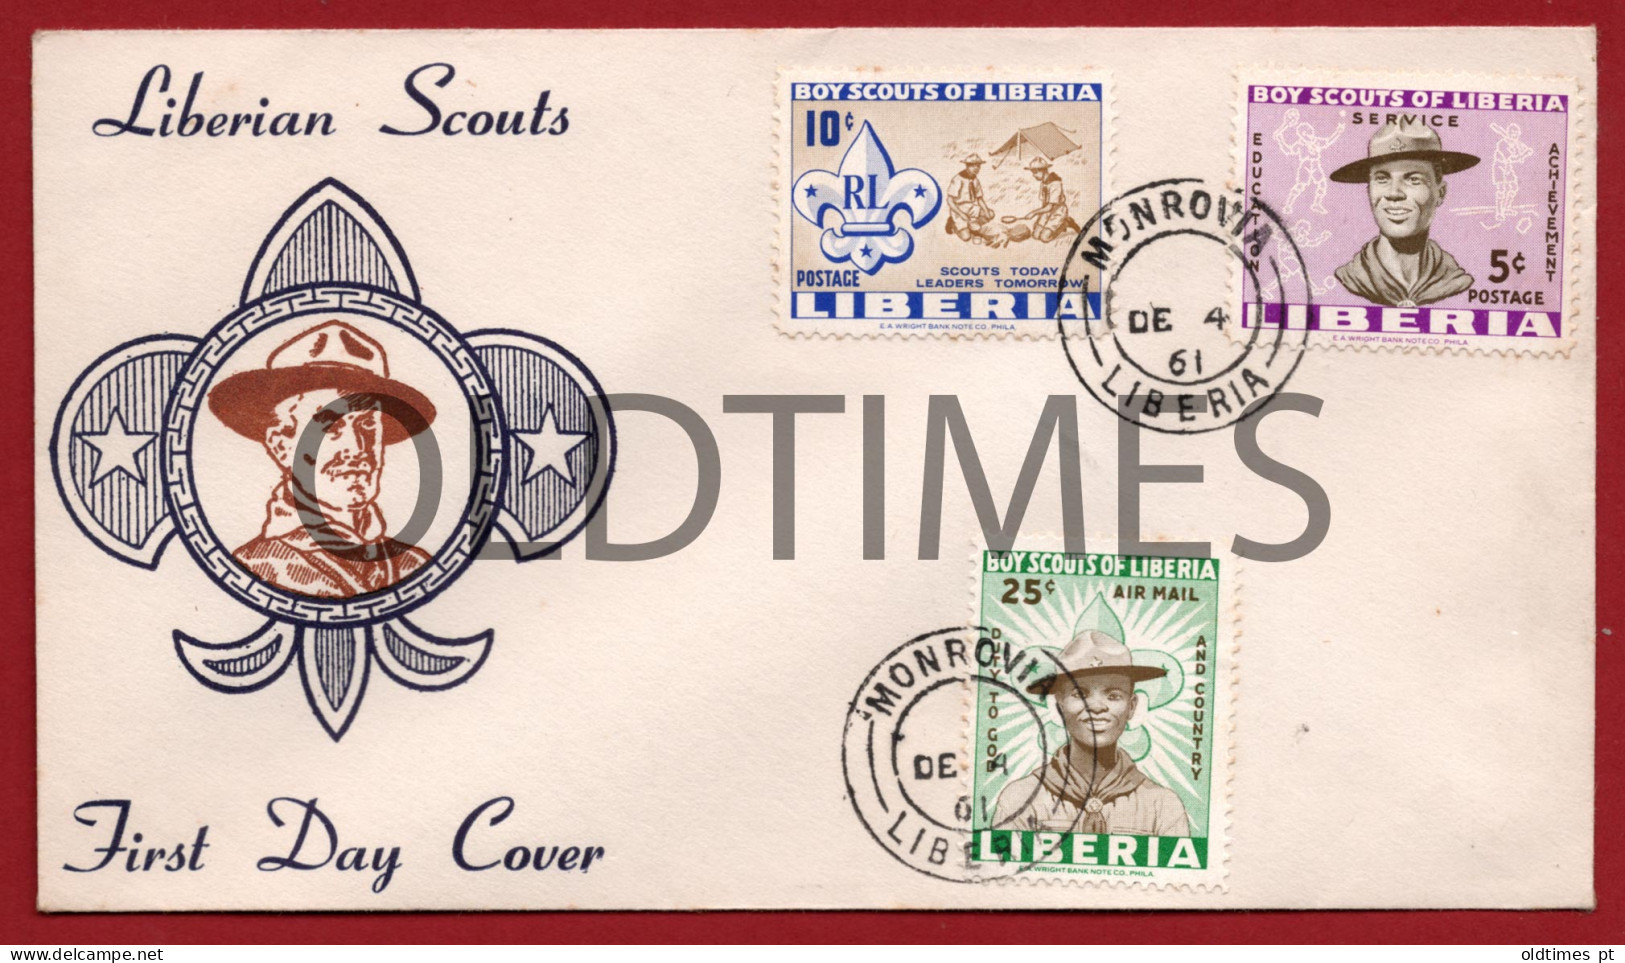 AFRICA - LIBERIA - LIBERIAN SCOUTS - FIRST DAY COVER - 1961 ENVELOPE - Scouting